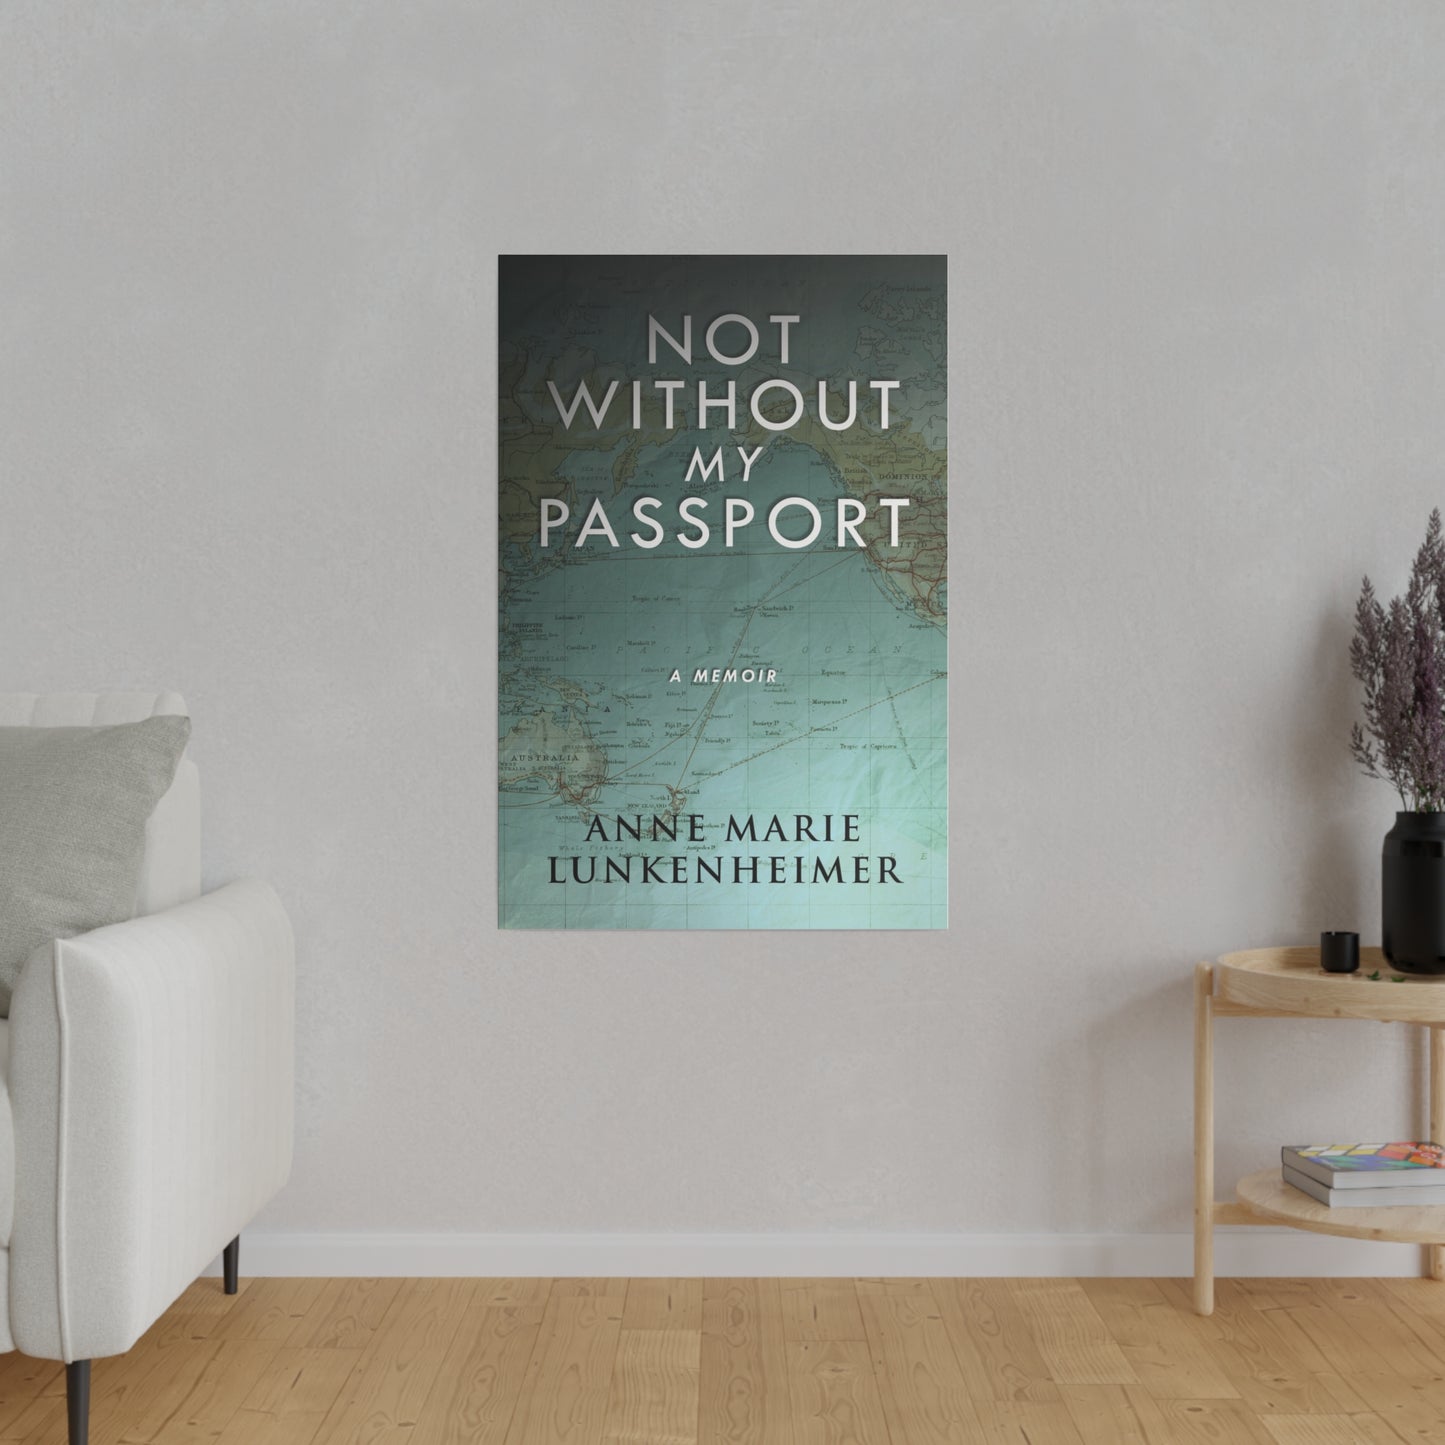 Not Without My Passport - Canvas